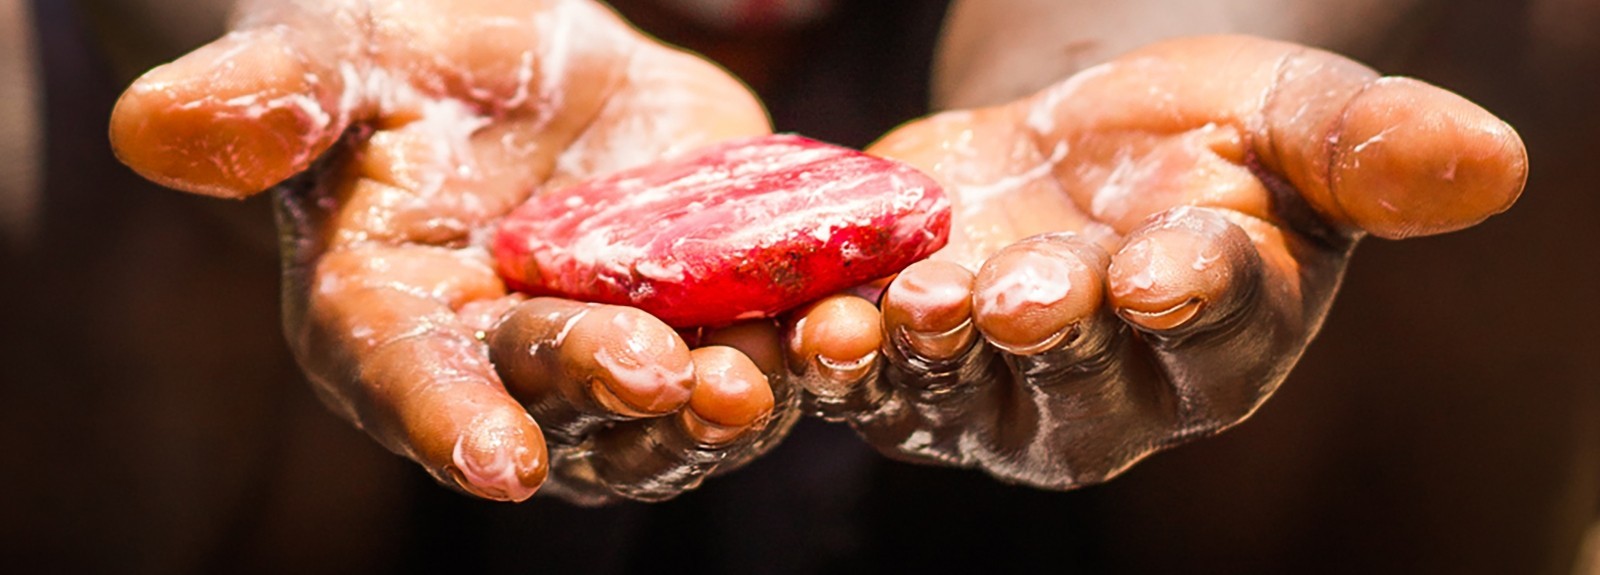 A child's soapy hands are outstretched holding a red bar of soap